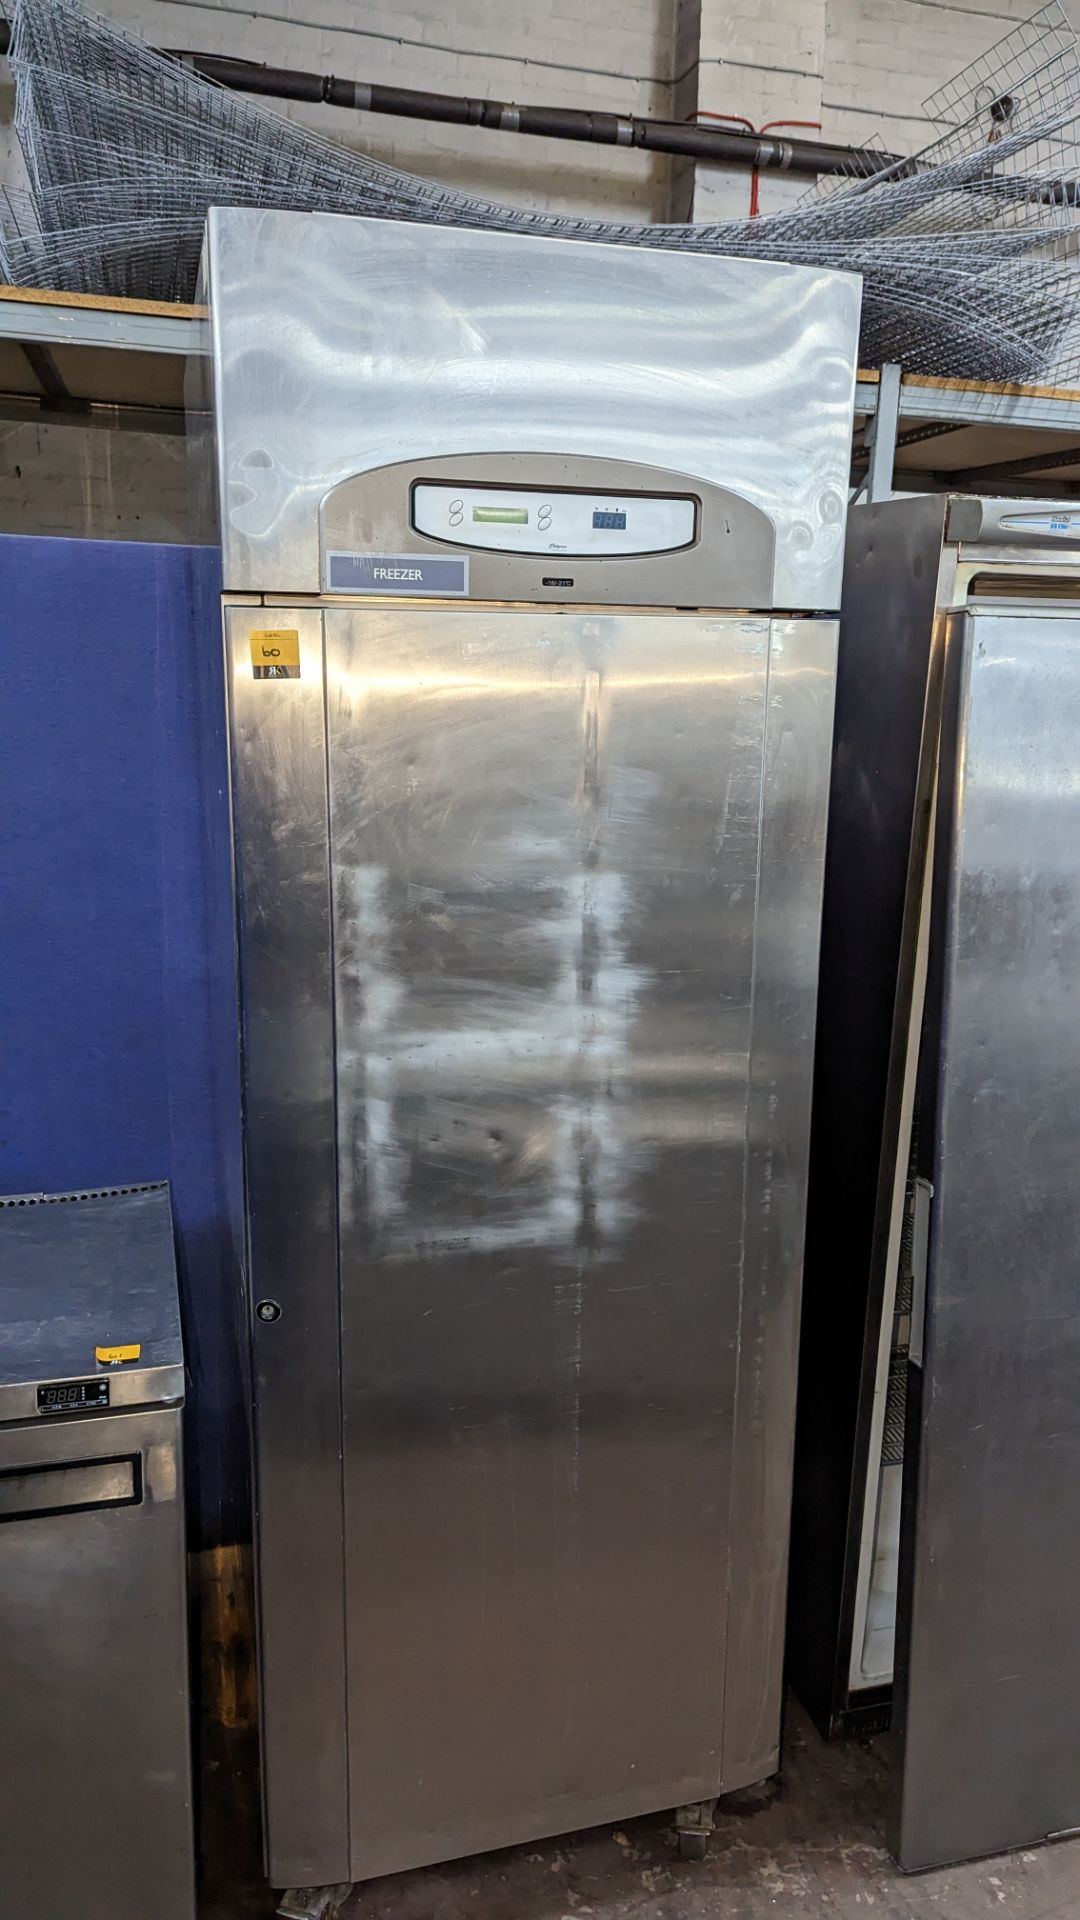 Foster stainless steel tall mobile freezer